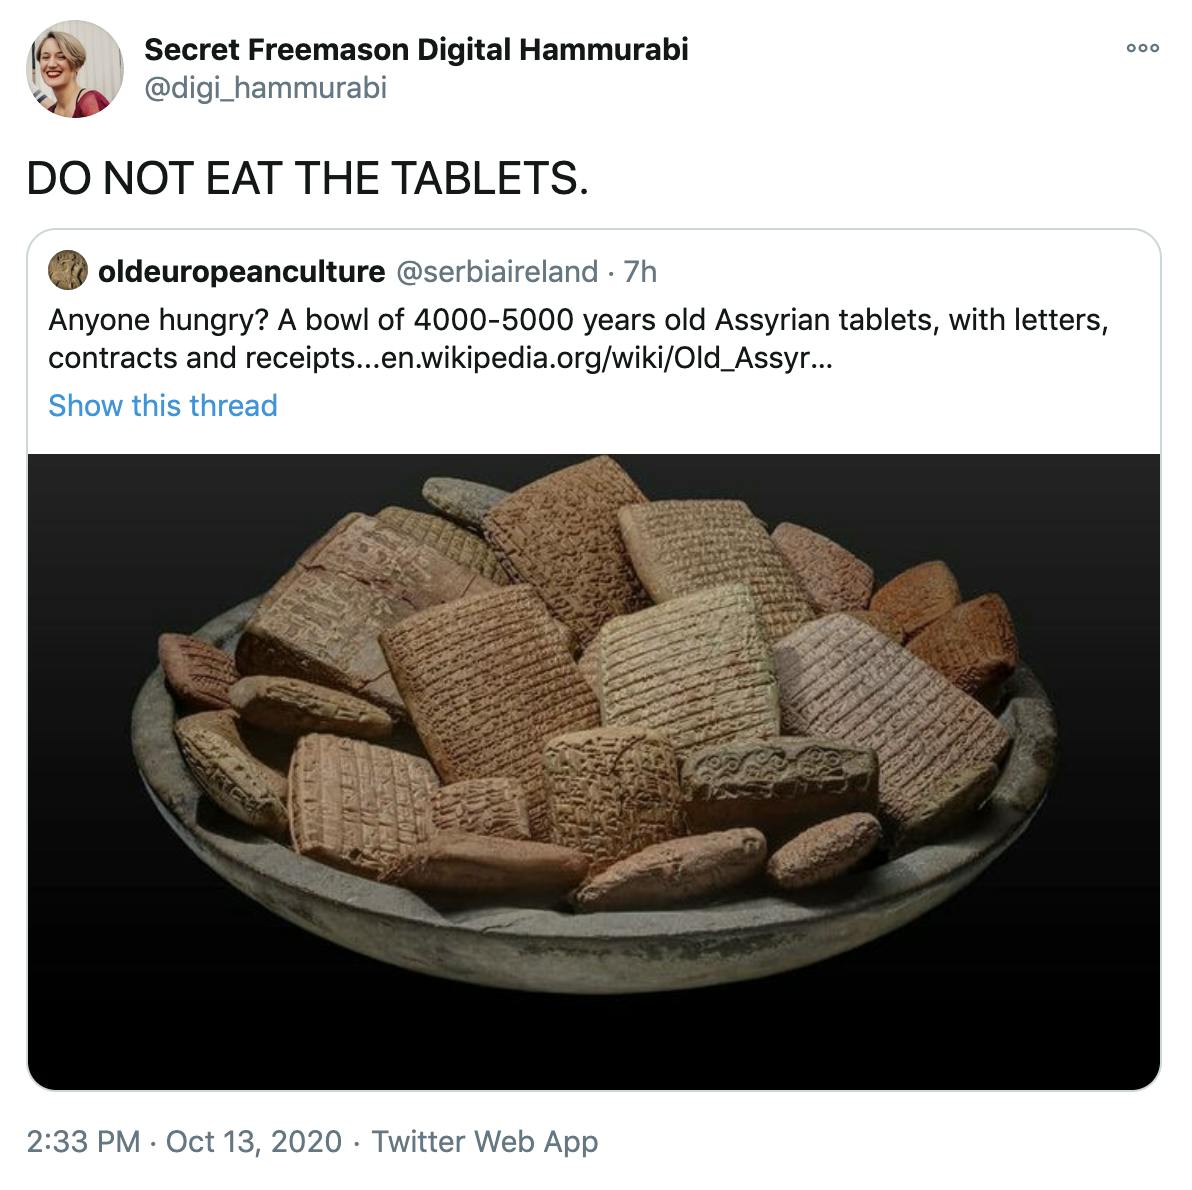 'DO NOT EAT THE TABLETS.' embed of original tweet